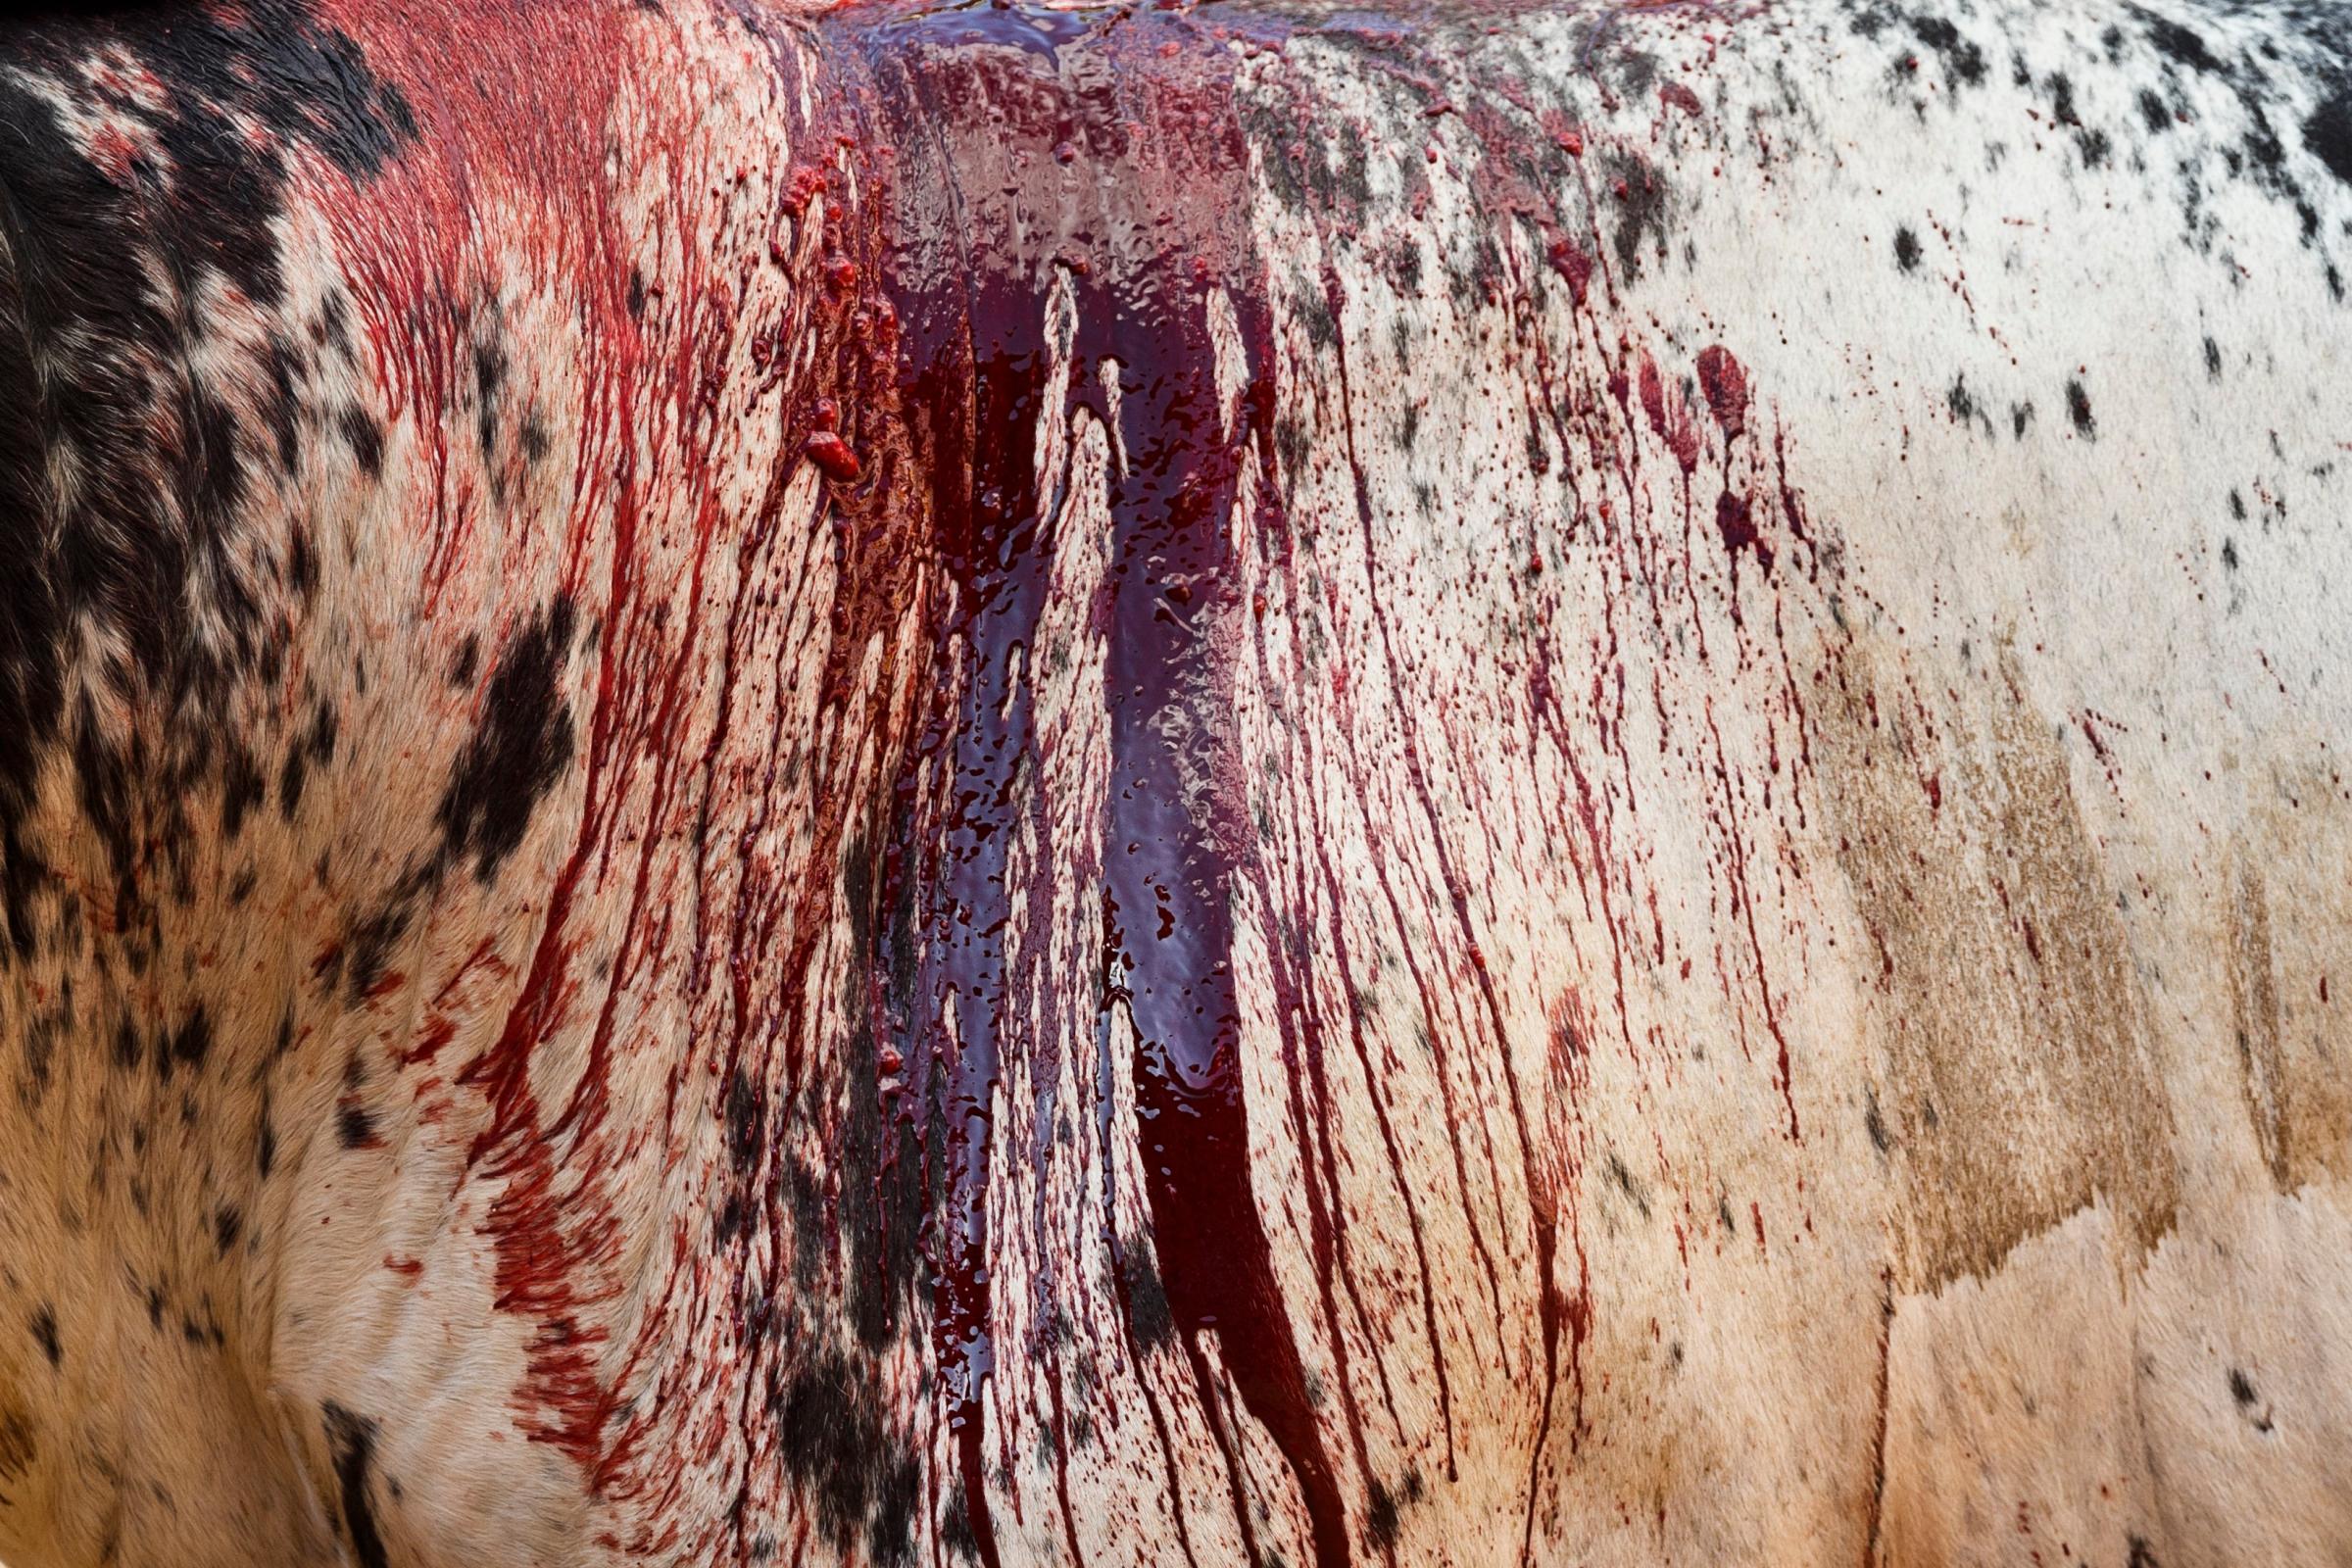 A Torrestrella ranch fighting bull bleeds during a bullfight of the San Fermin festival, in Pamplona, Spain on July 7, 2014.